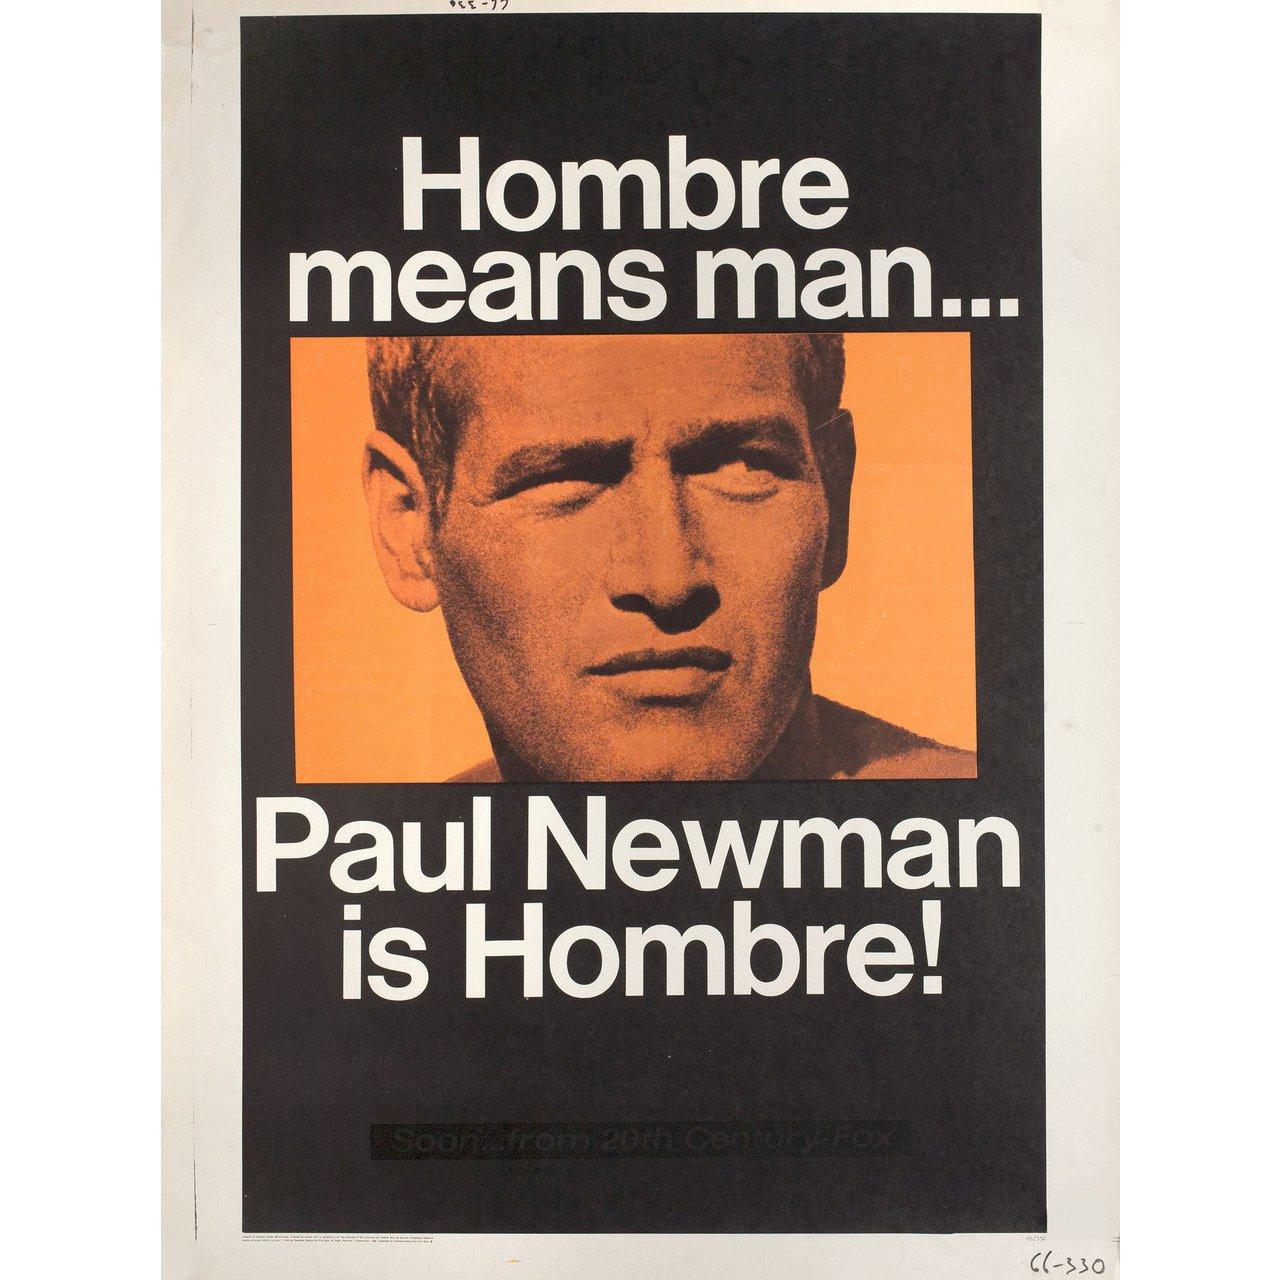 American Hombre 1967 U.S. 30 by 40 Film Poster